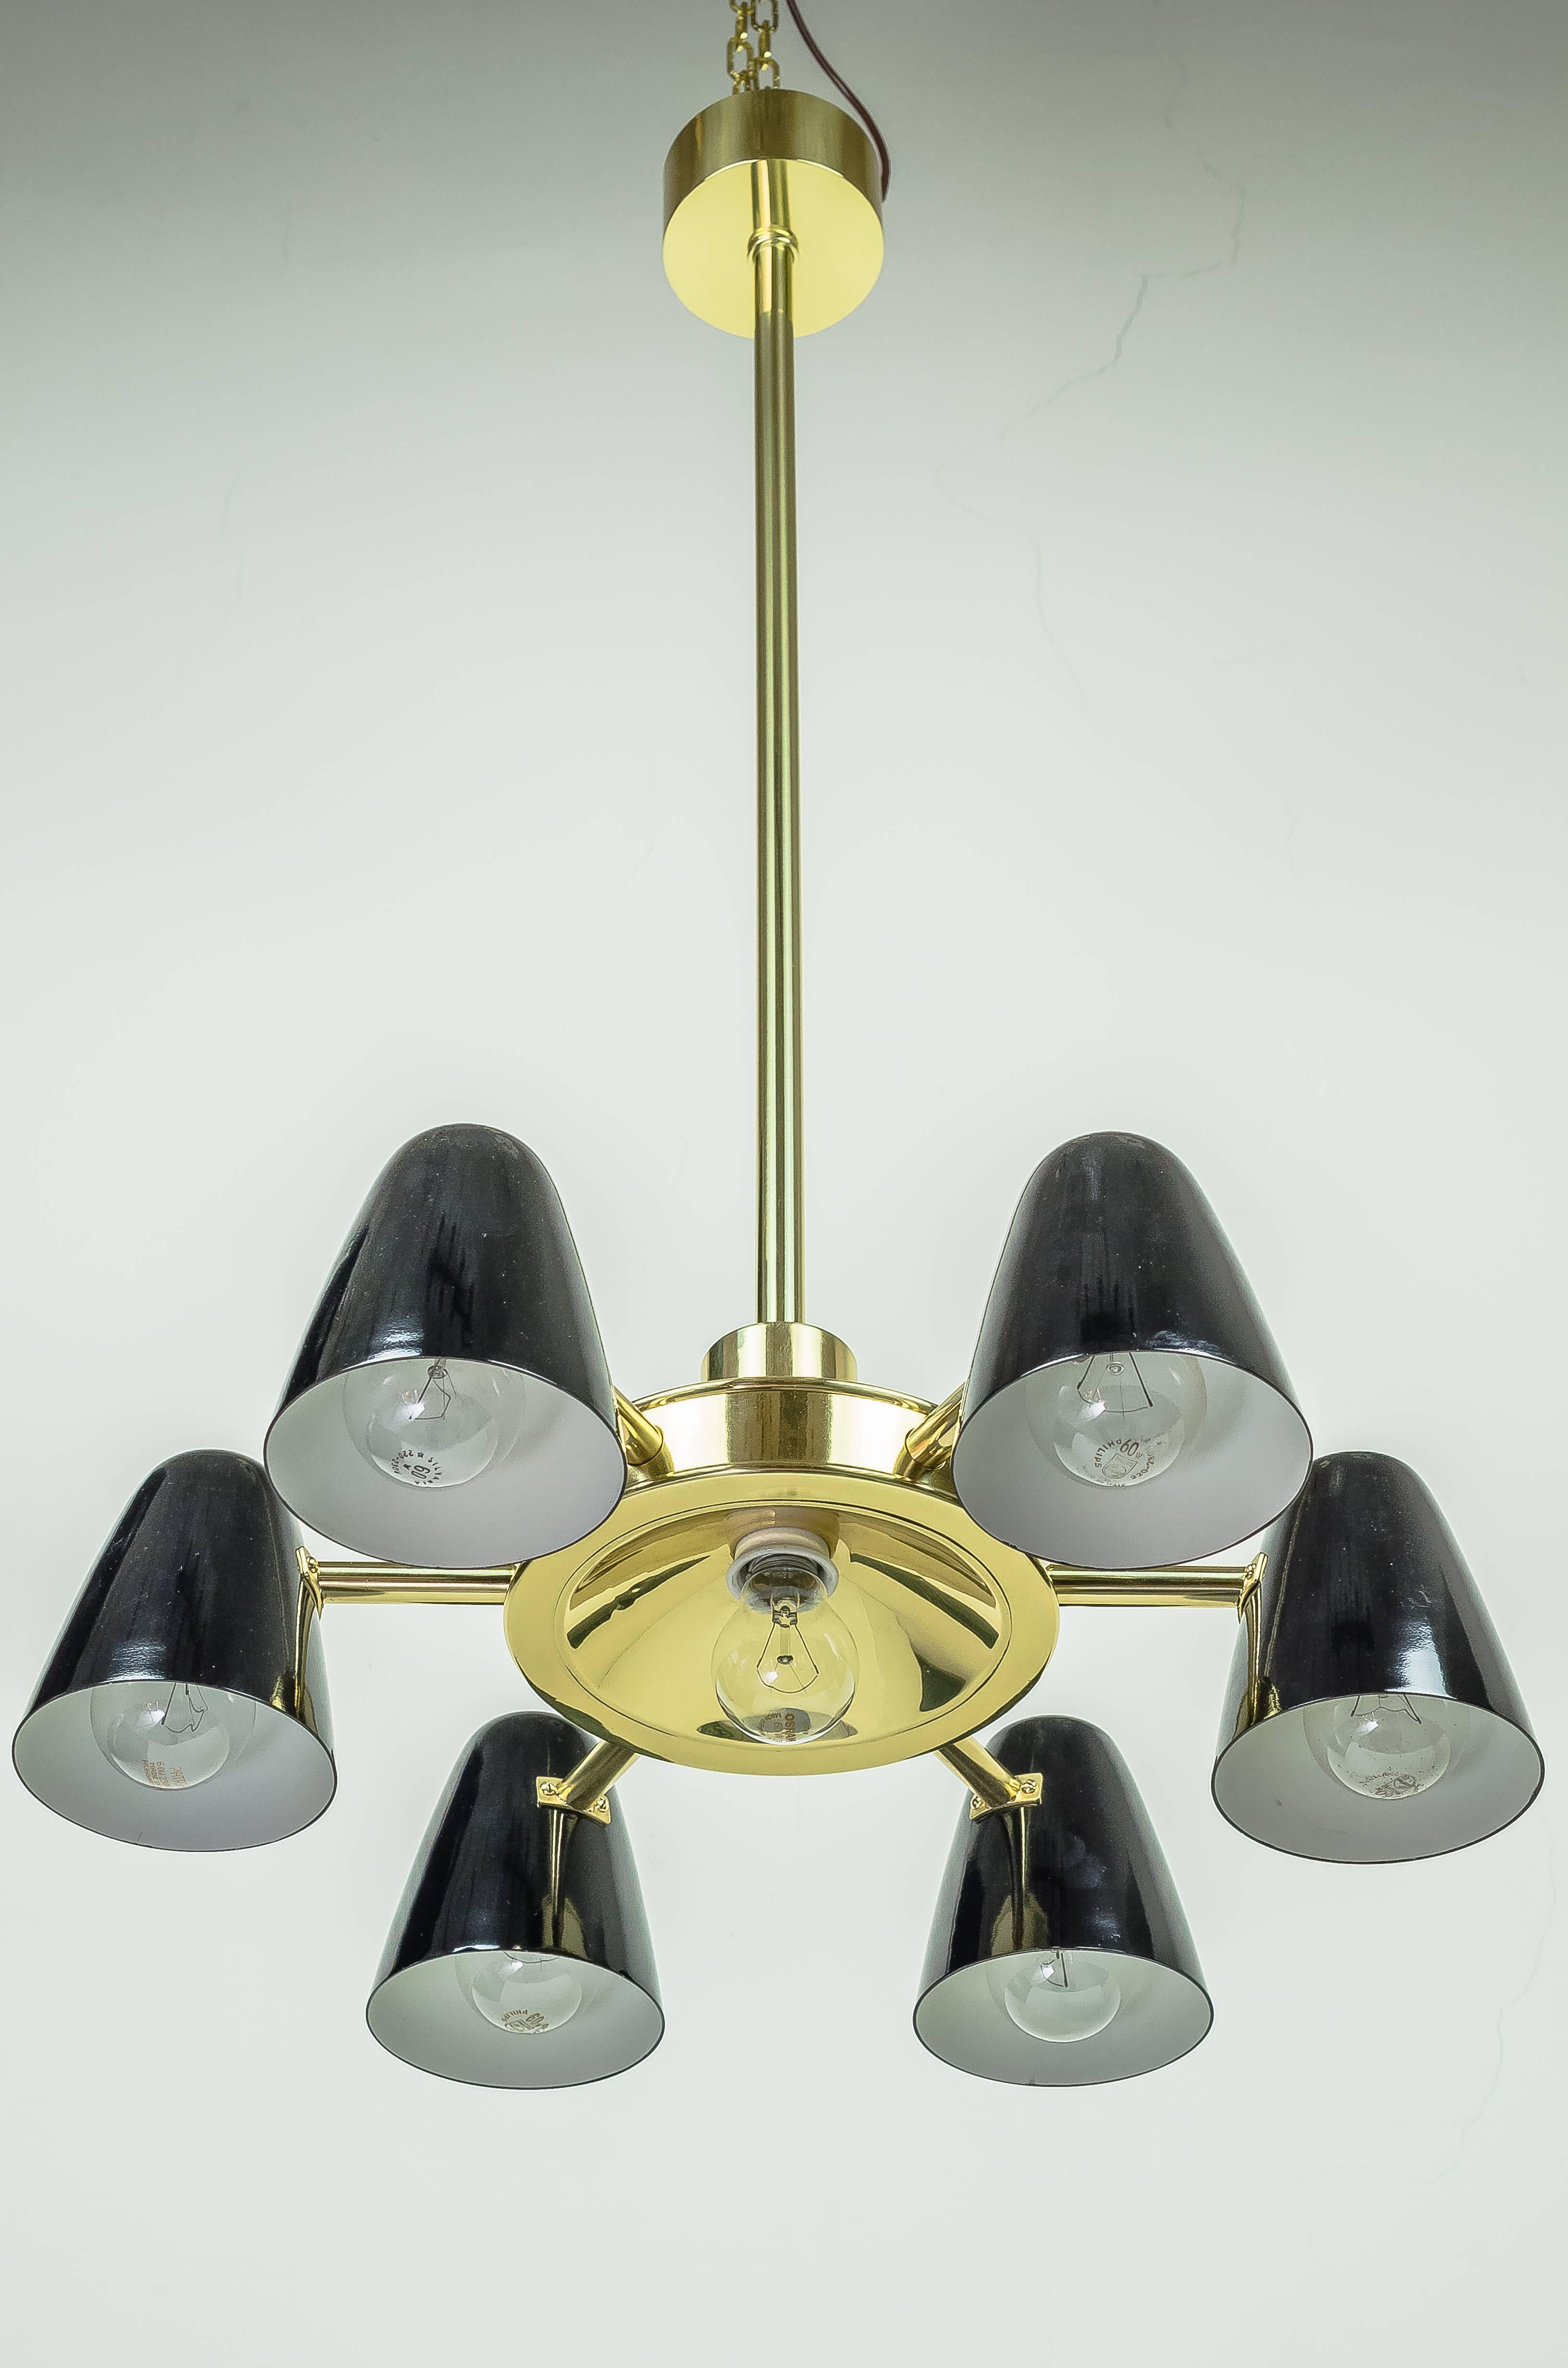 Chandelier circa 1958 in the style of Stilnovo.
Brass polished and stove enamelled.
Aluminium blackened.
Priced and sell per piece.
We have a third one but a little bit smaller in diameter.